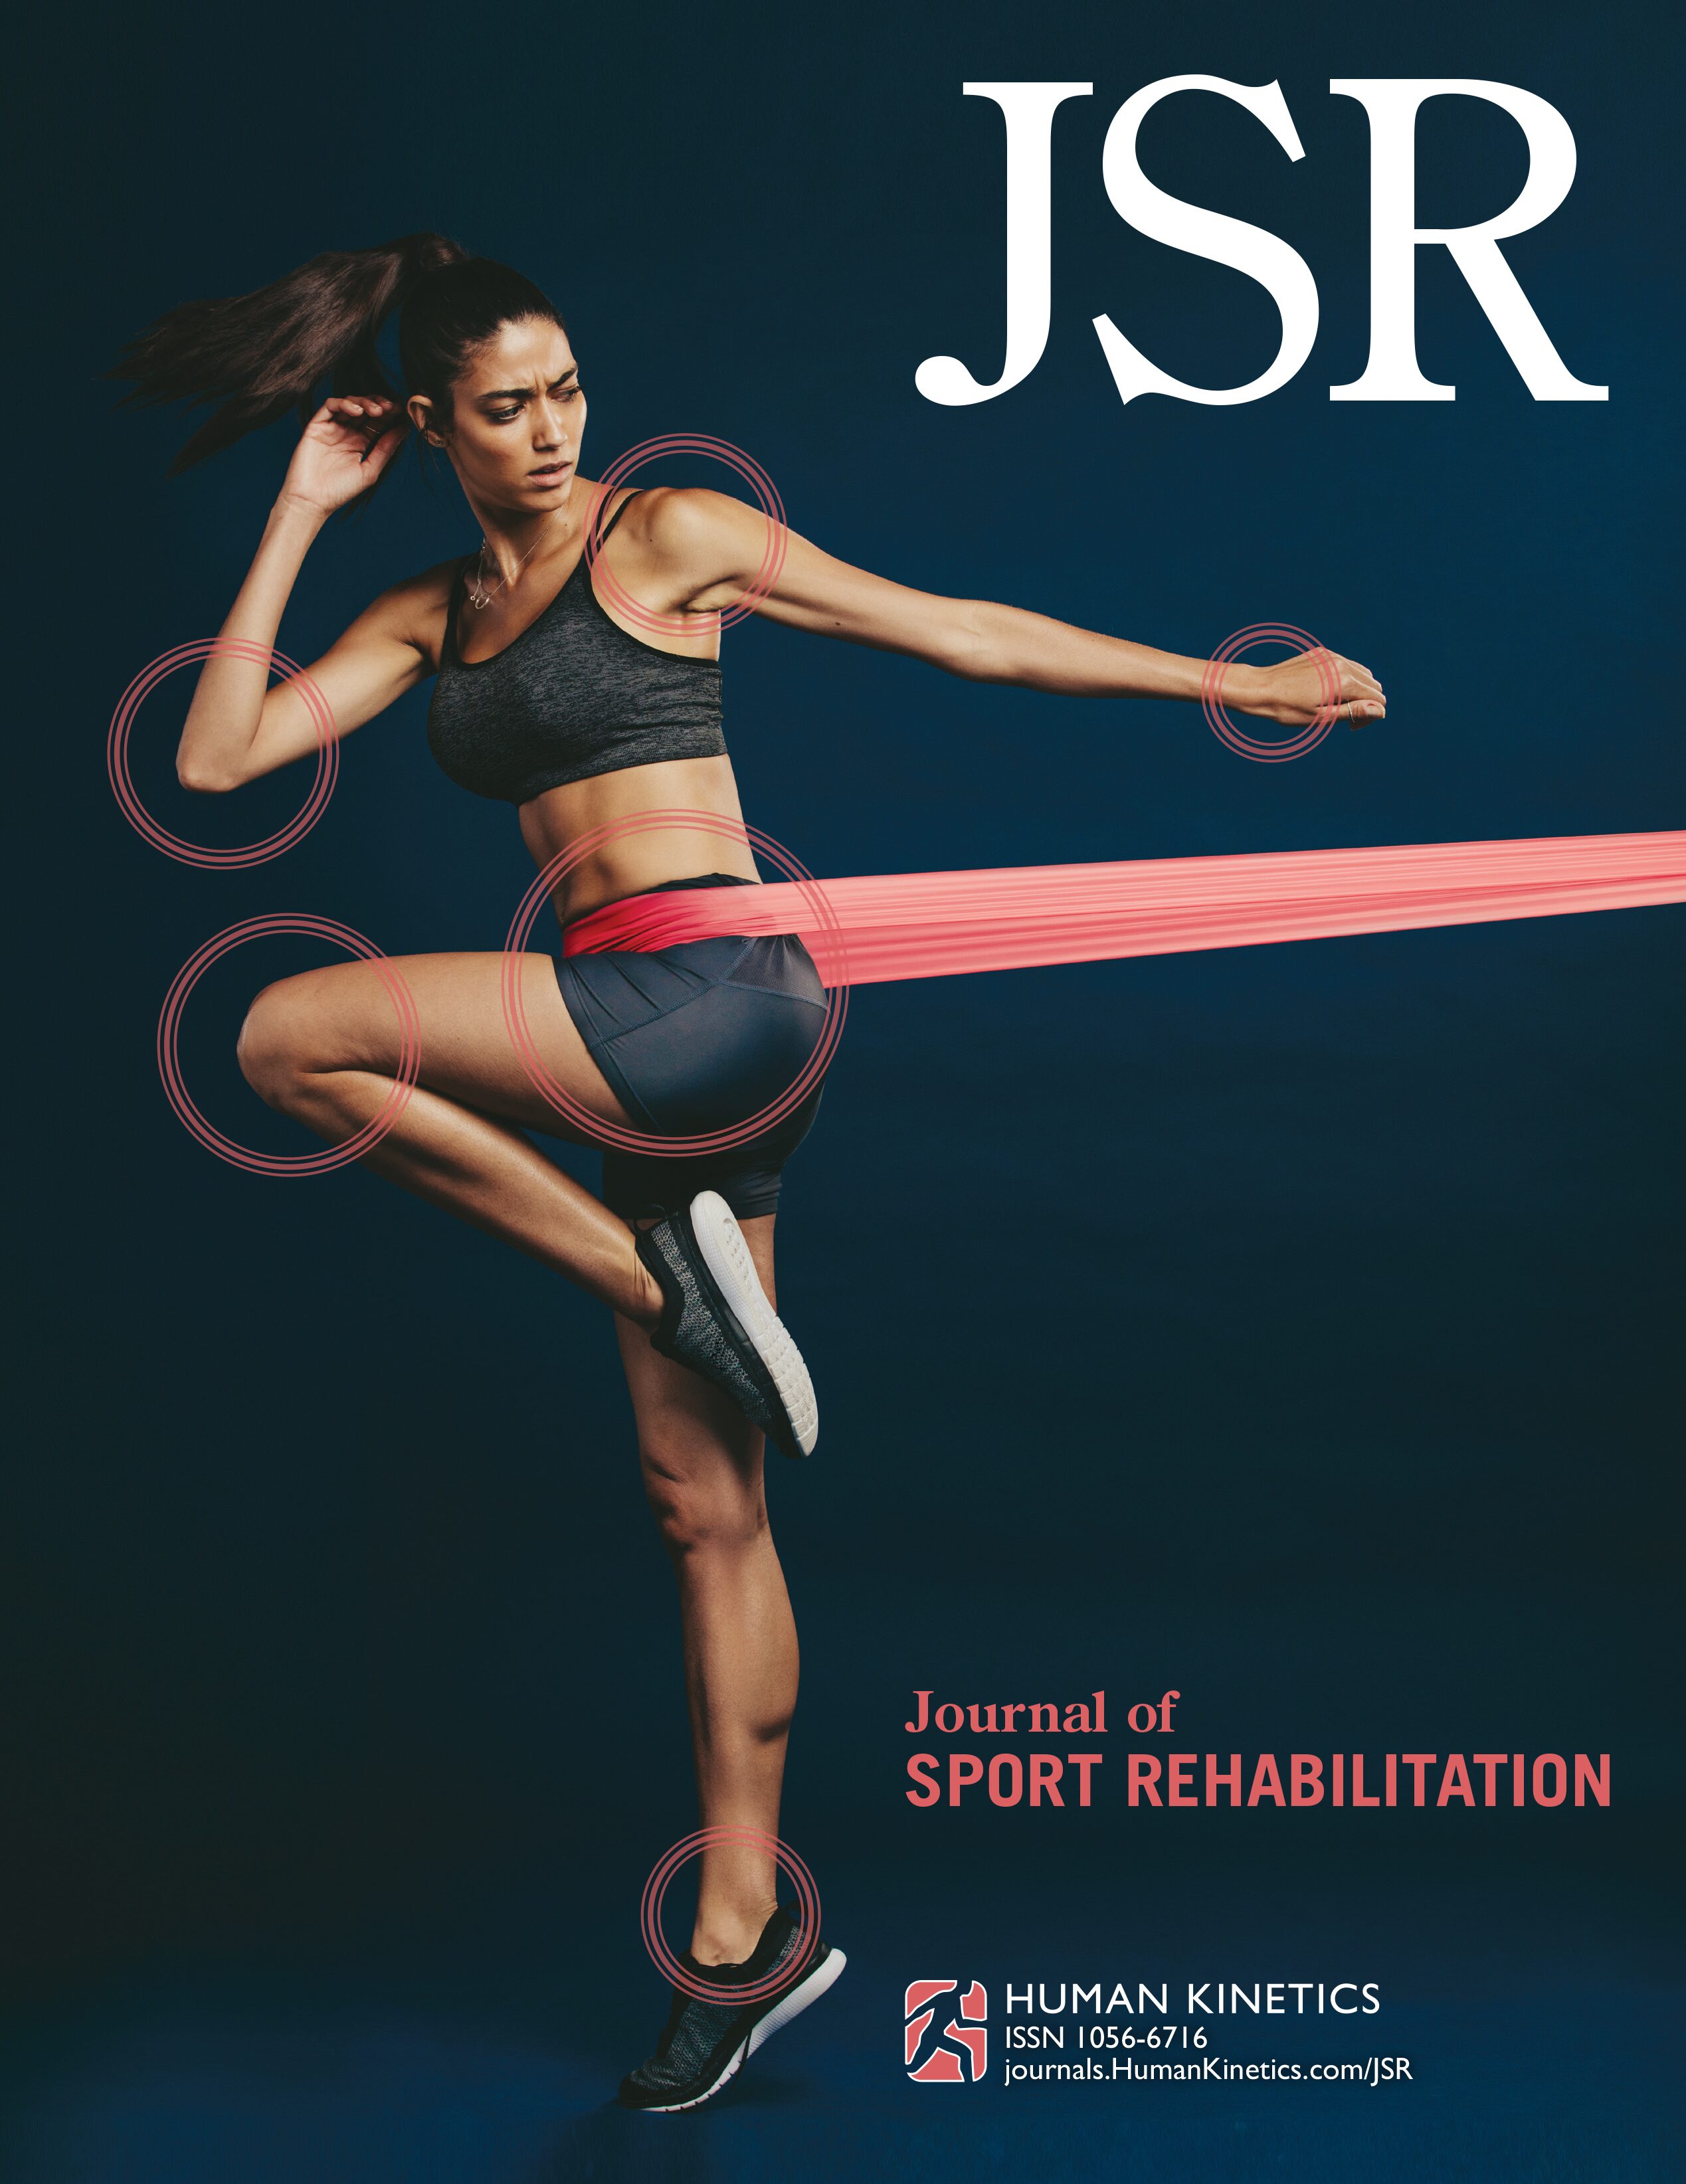 Ultrasound-Guided Percutaneous Needle Electrolysis Combined With Therapeutic Exercise May Add Benefit in the Management of Soleus Injury in Female Soccer Players: A Pilot Study